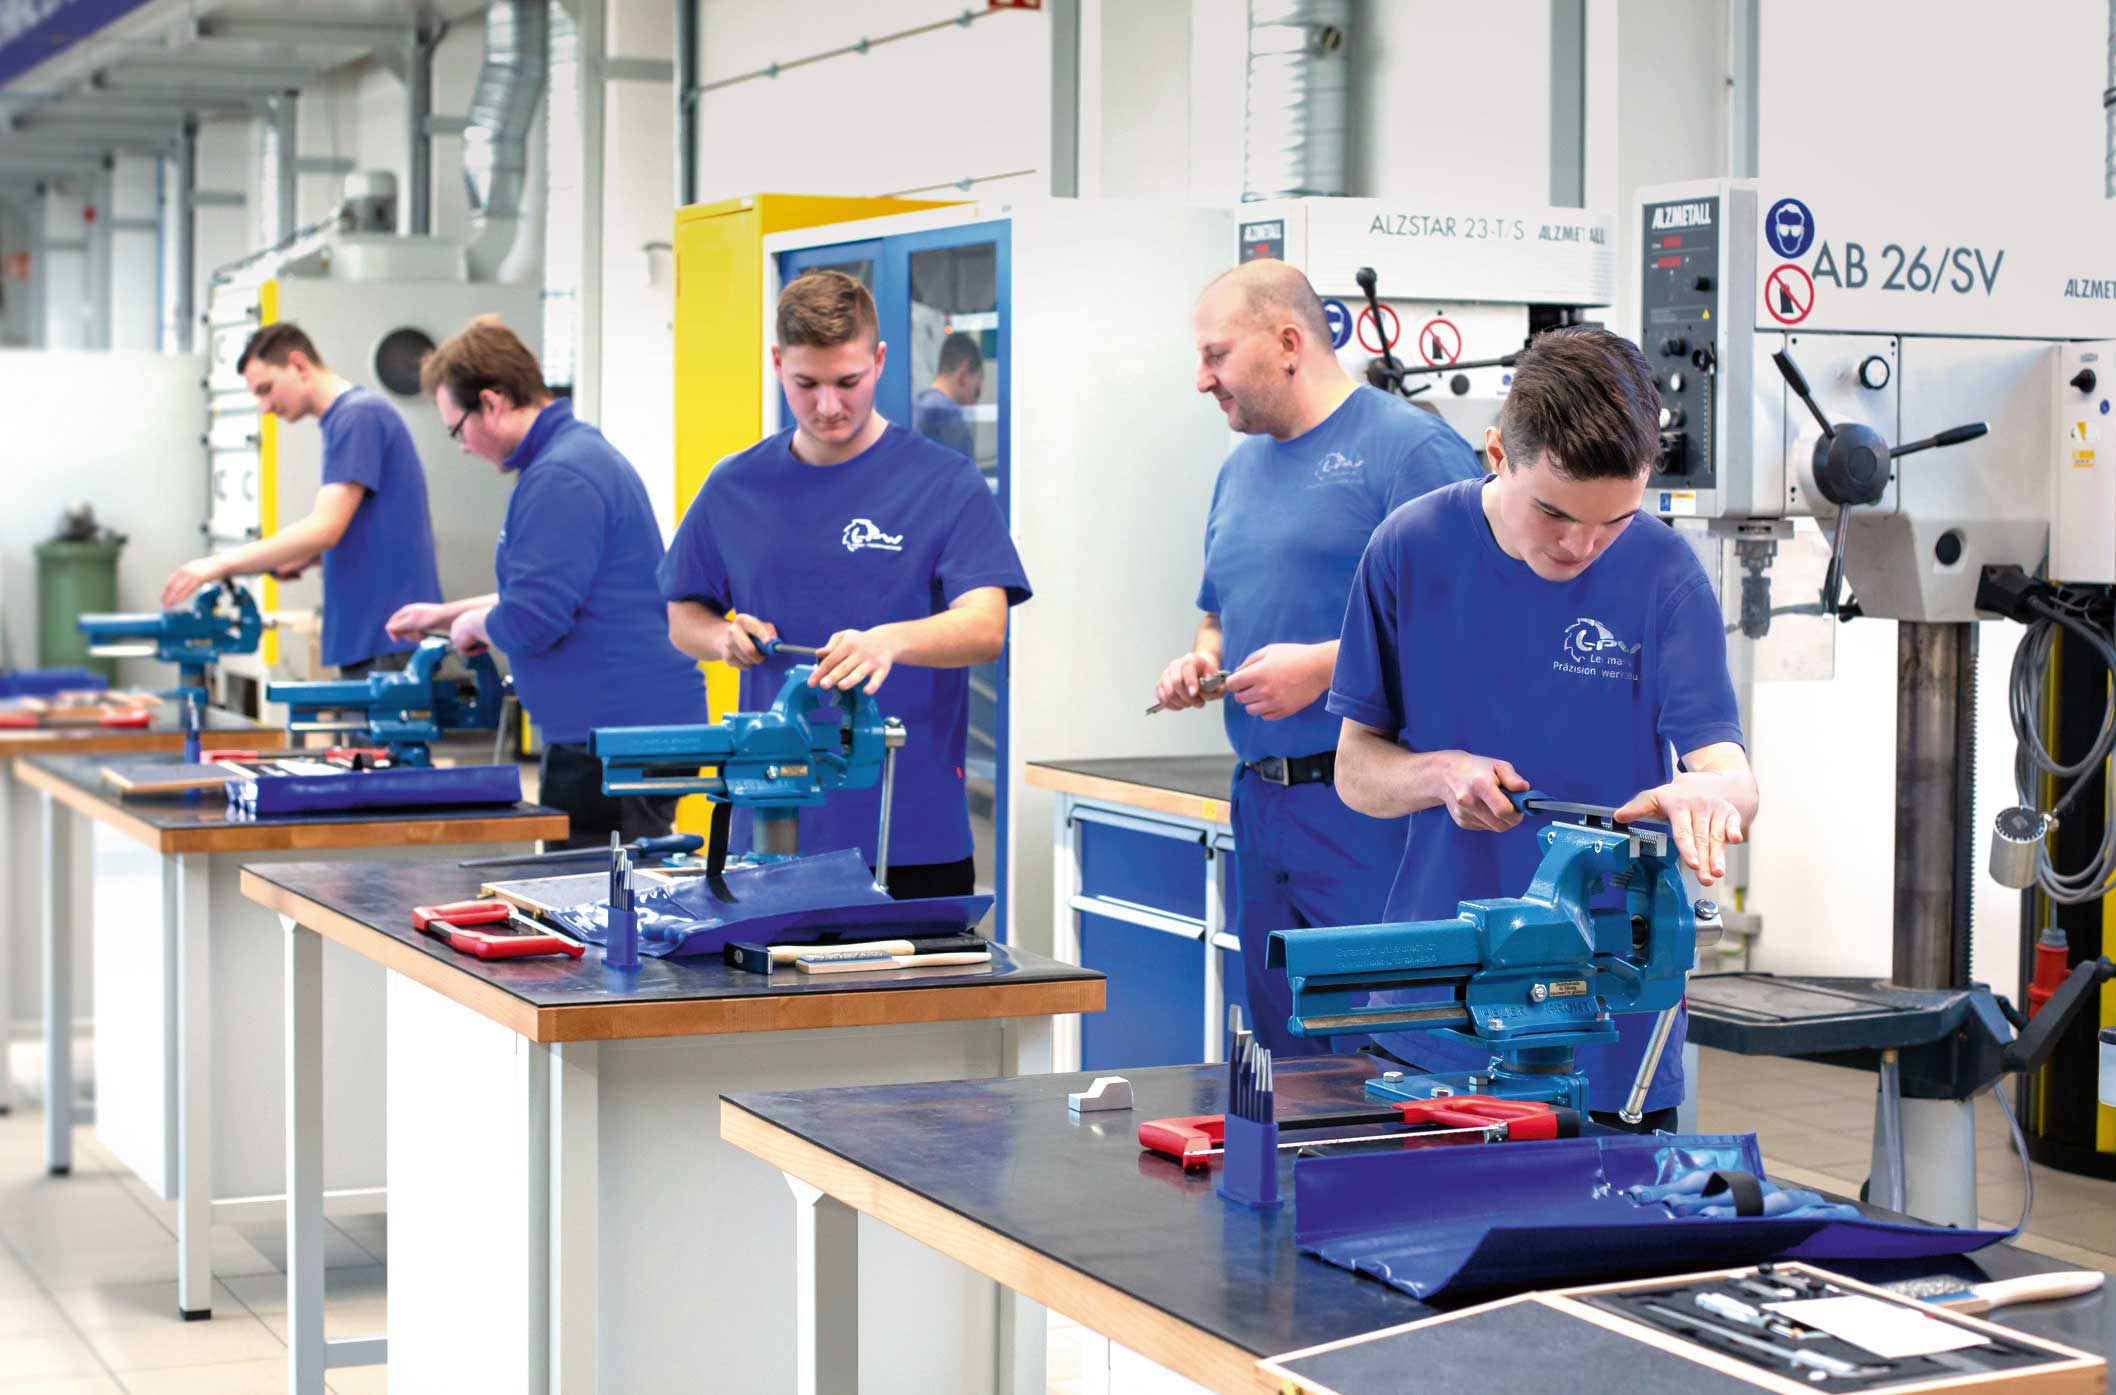 So that it will have sufficient skilled workers in the future, Lehmann trains its own ­apprentices.